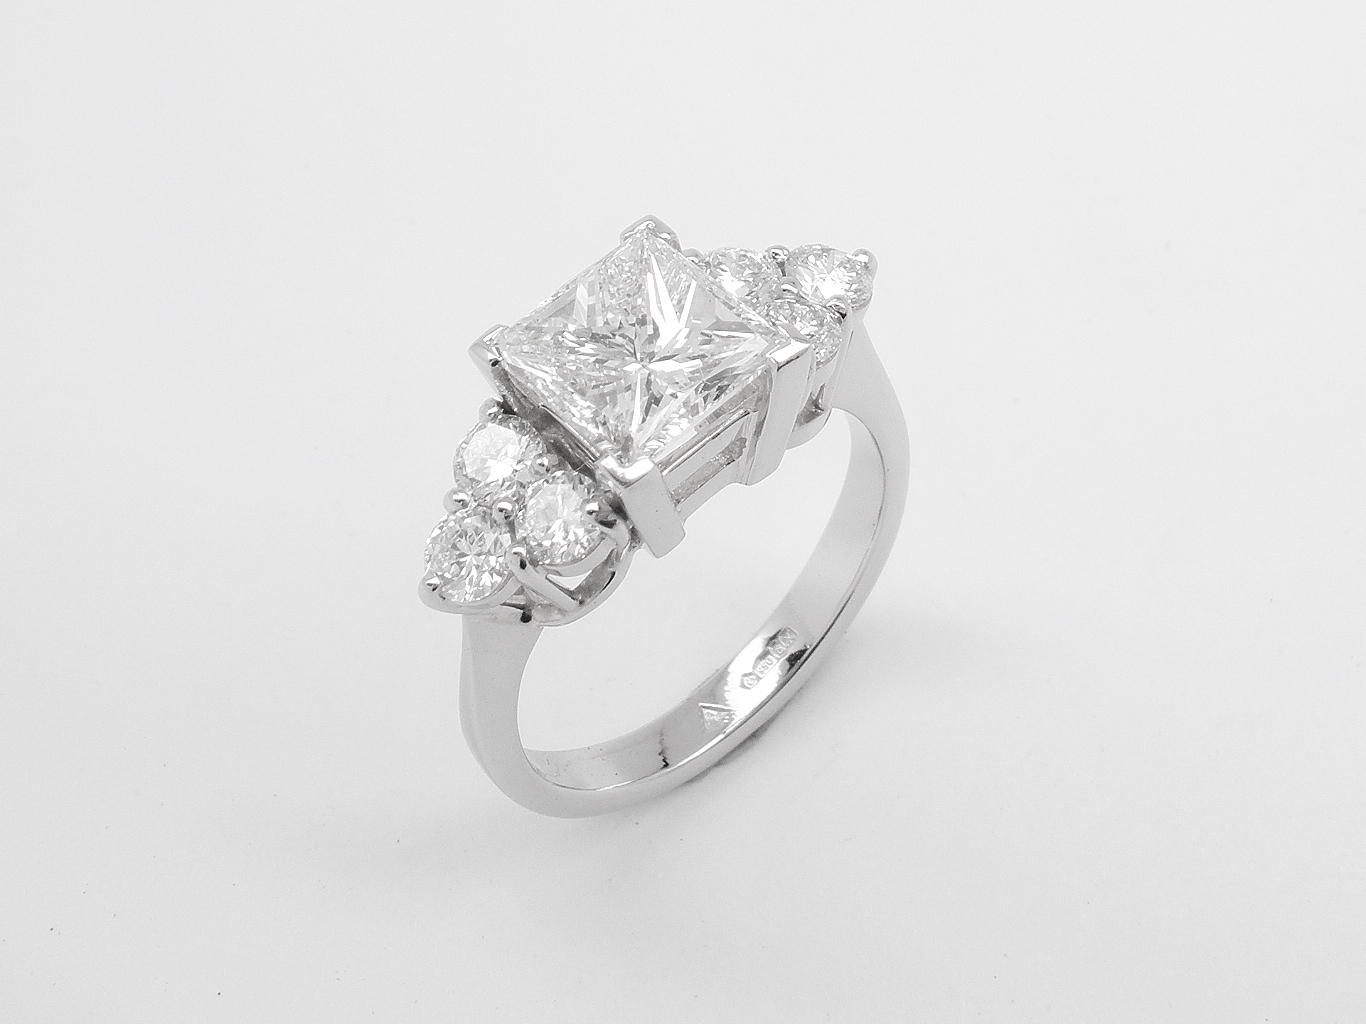 A 7 stone princess cut and round brilliant cut diamond ring mounted in platinum.